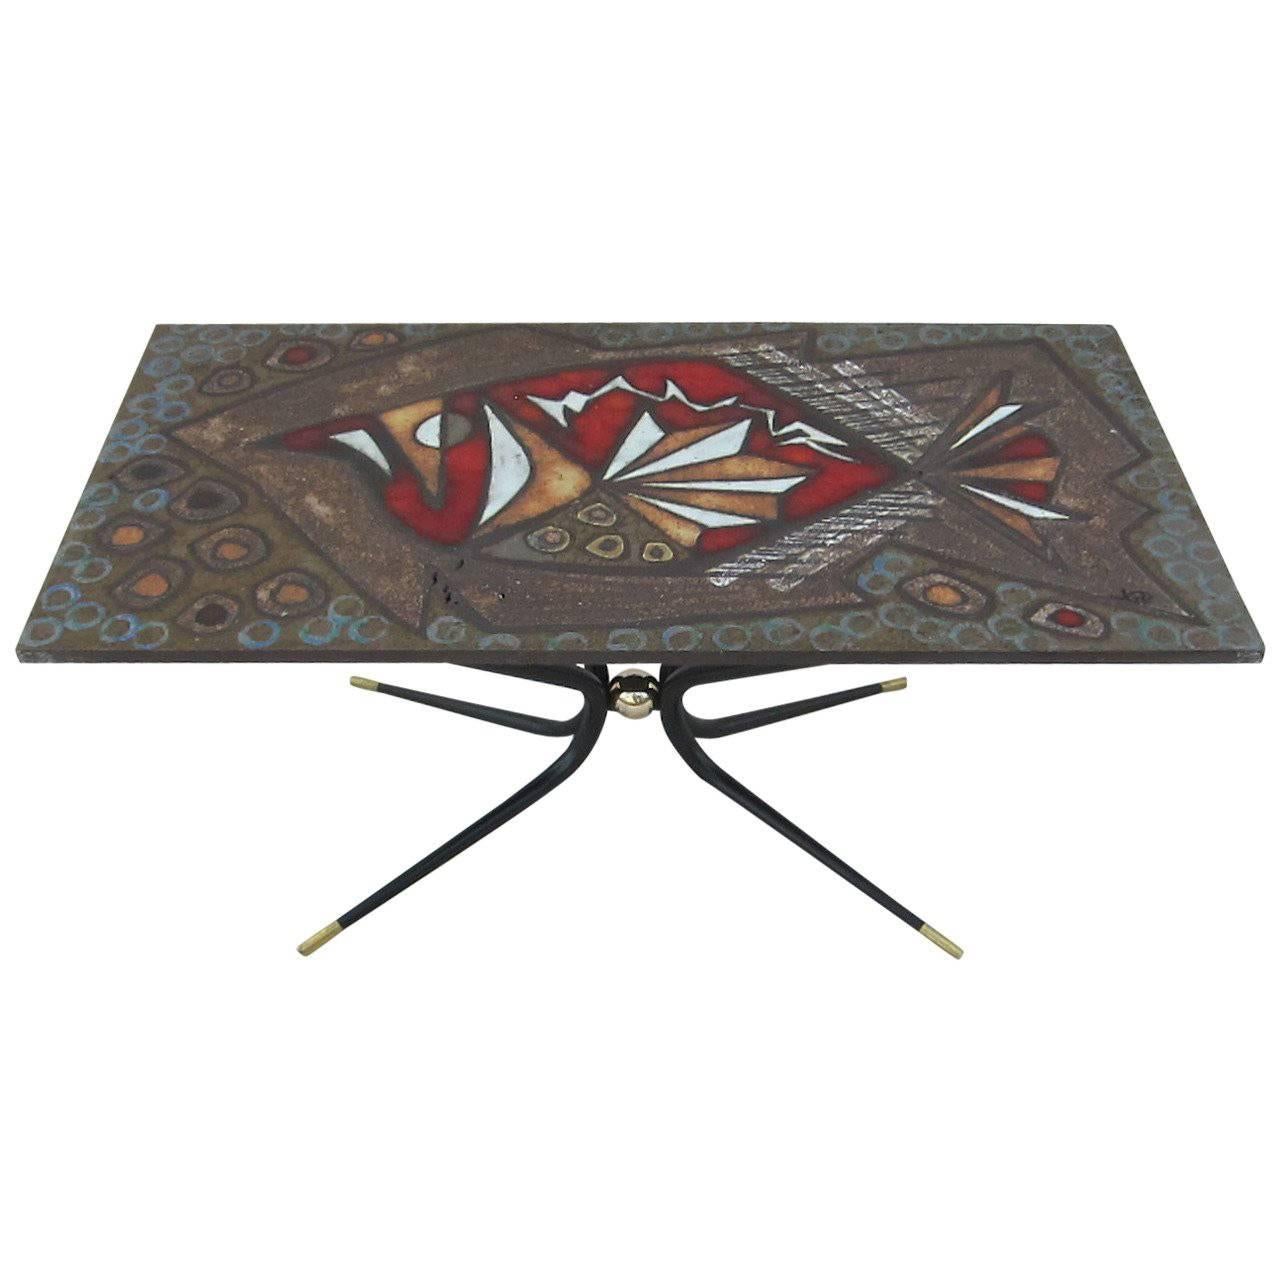 Italian Artisan Tile Table in the Style of Gio Ponti For Sale